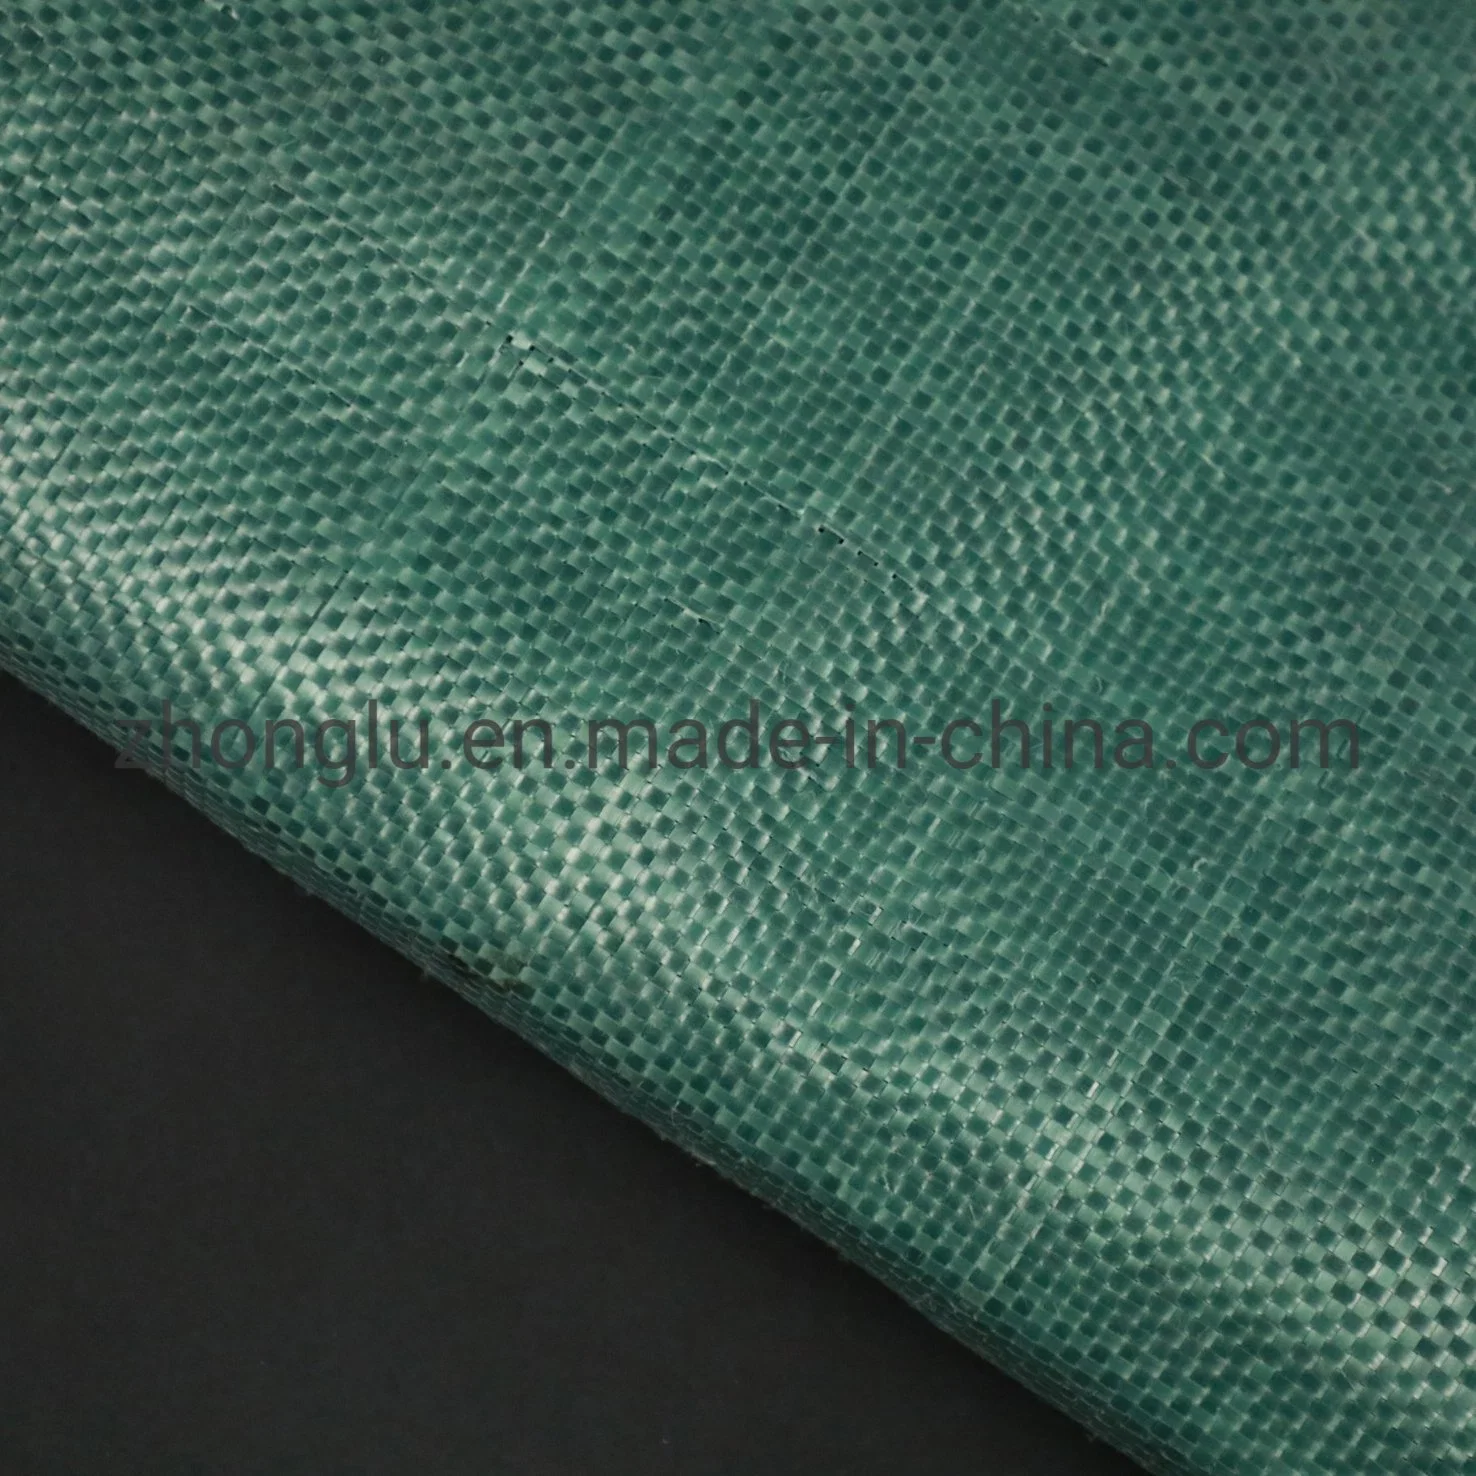 Ground Cover Weed Control Fabric/ PP Woven Fabric/ PP Woven Geotextile